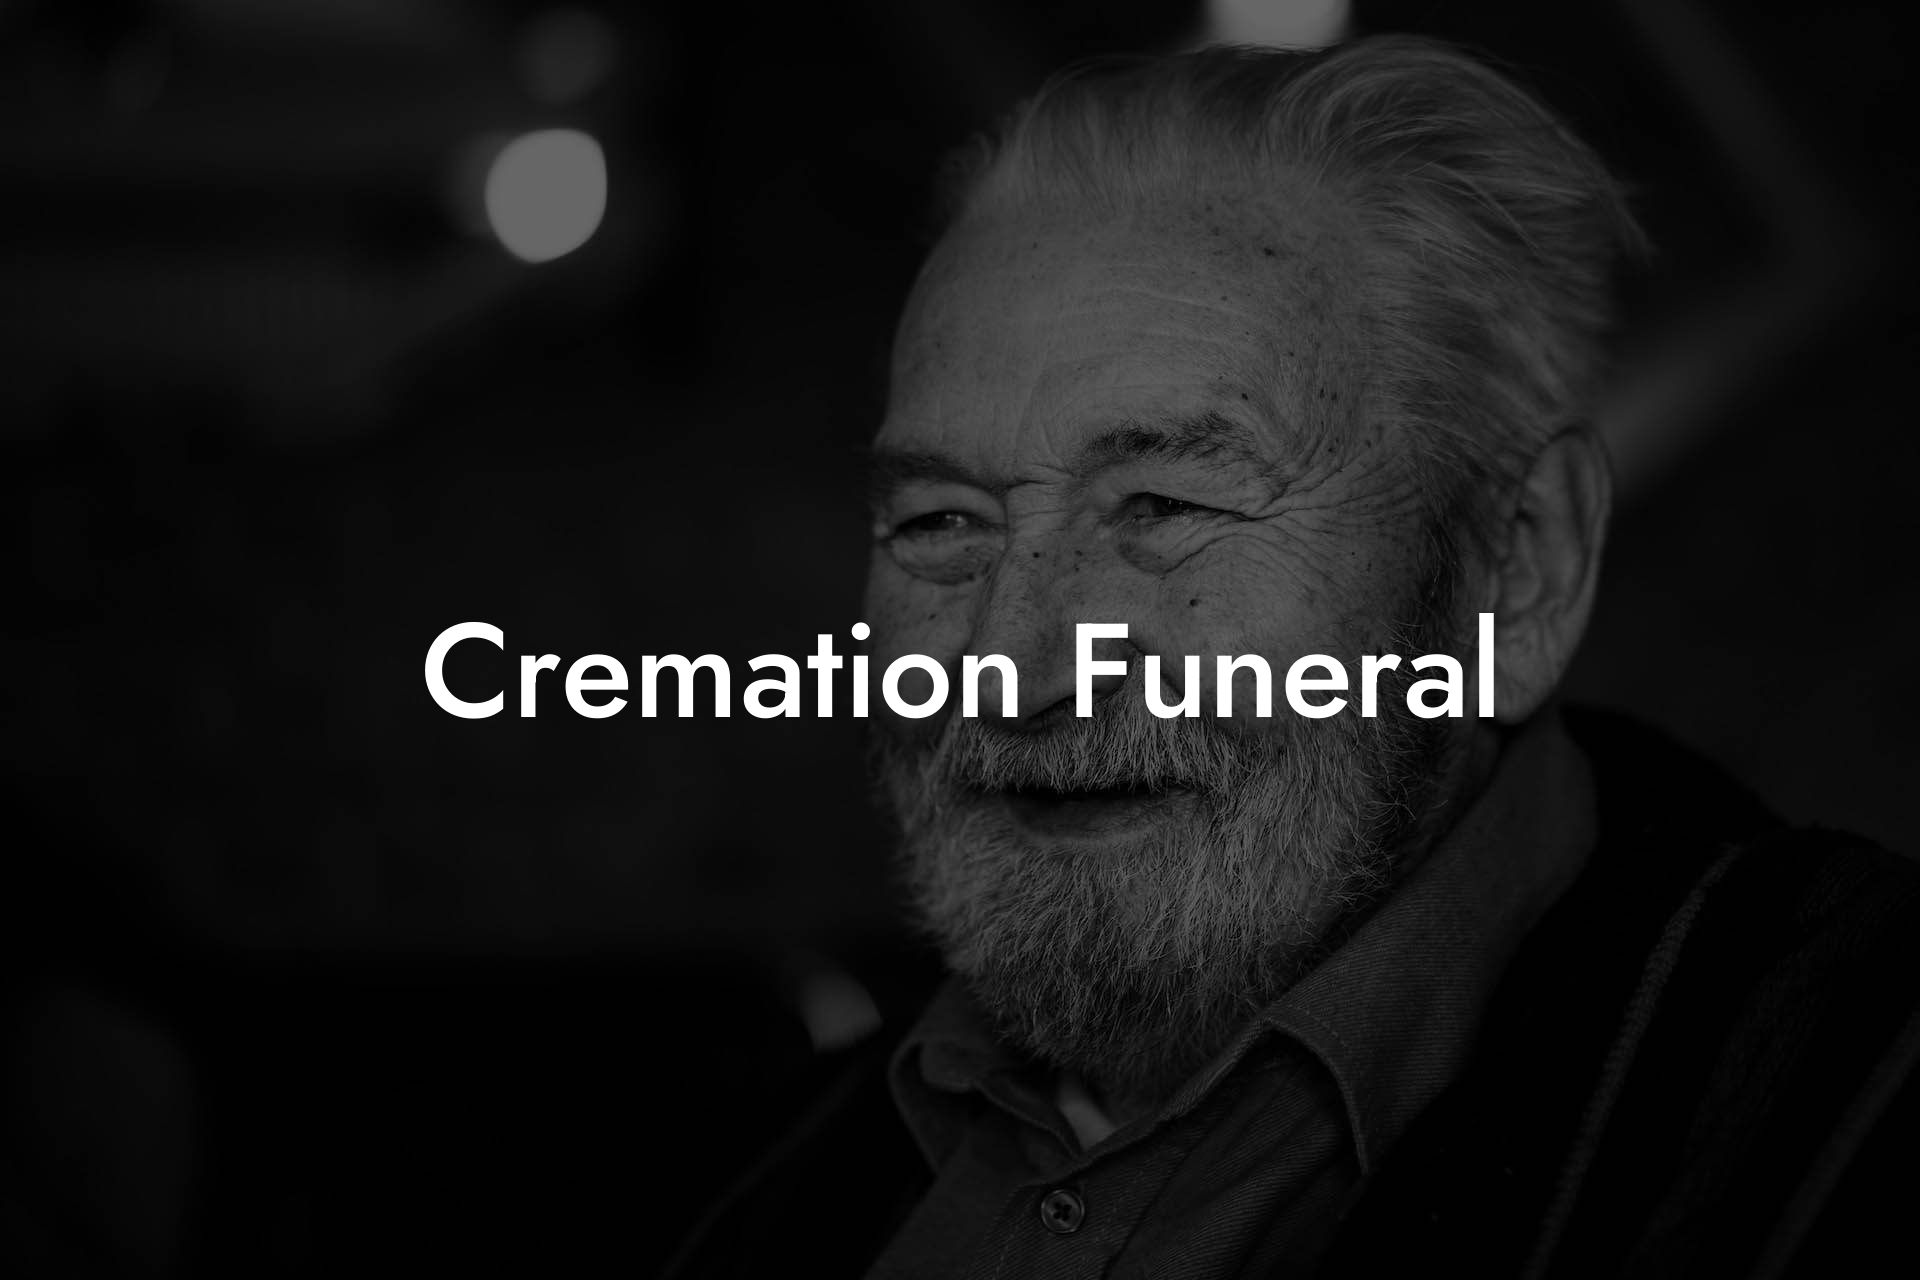 Cremation Funeral